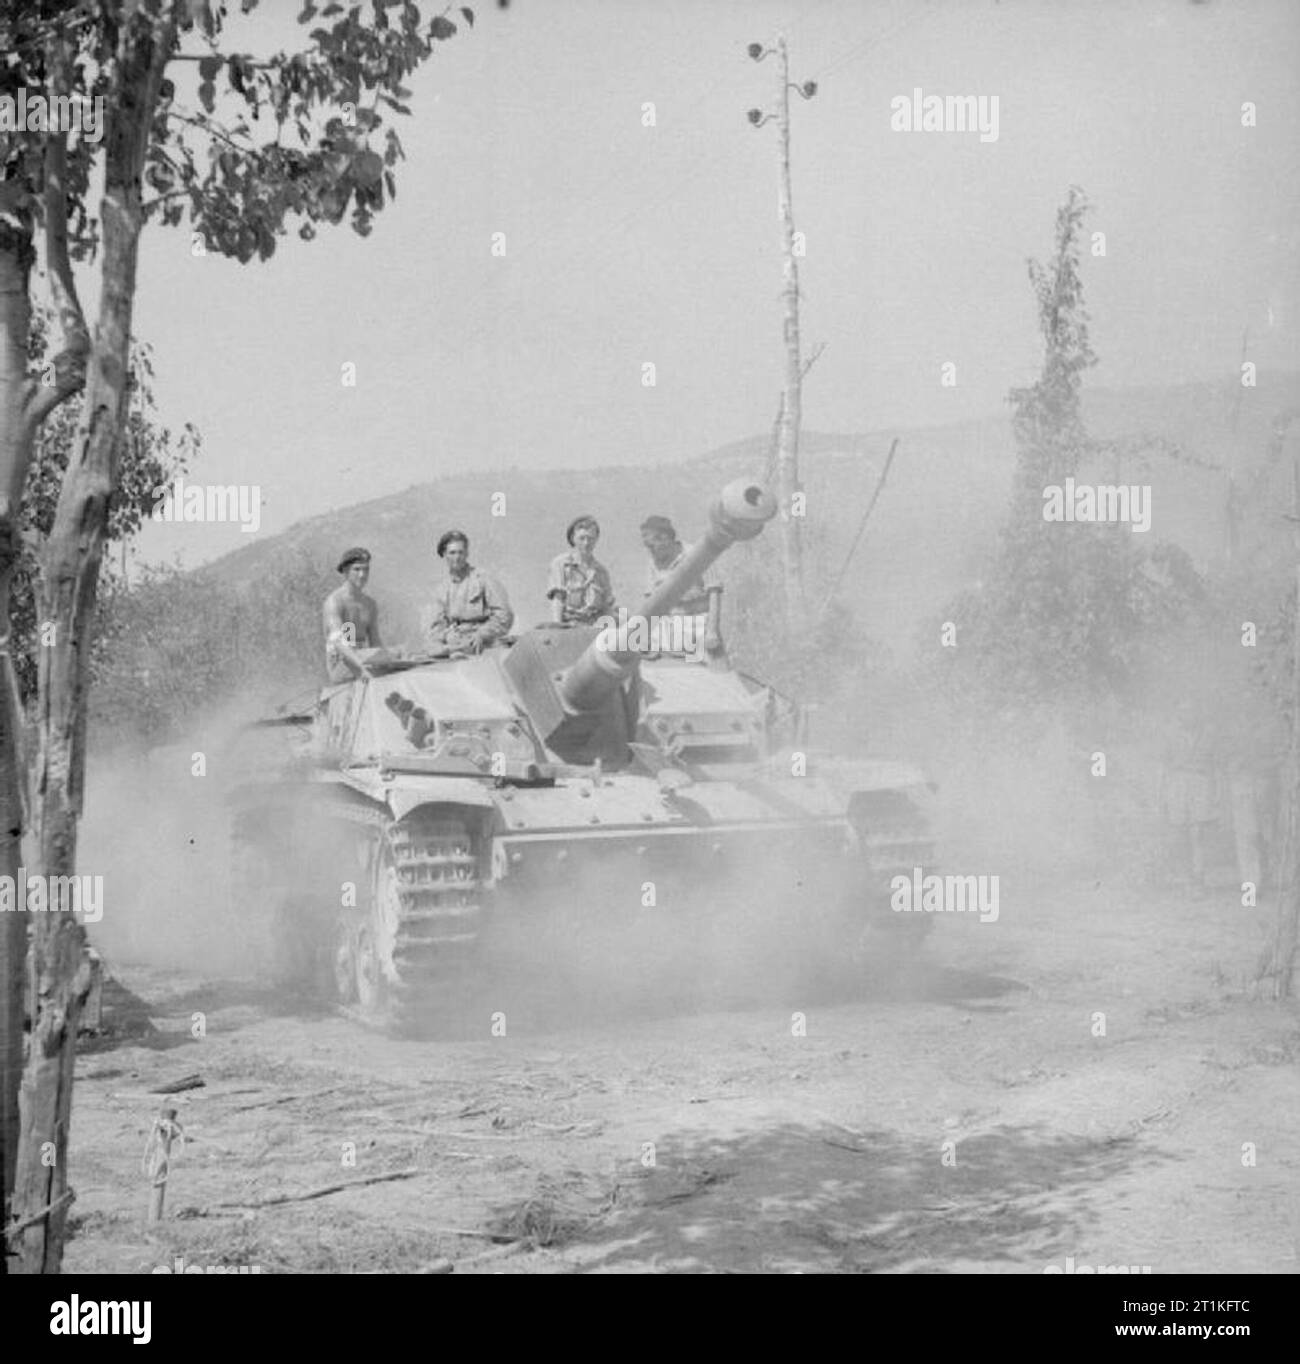 The British Army in Italy 1943 Men from 40th Royal Tank Regiment try out a captured German StuG III assault gun, 14 September 1943. Stock Photo